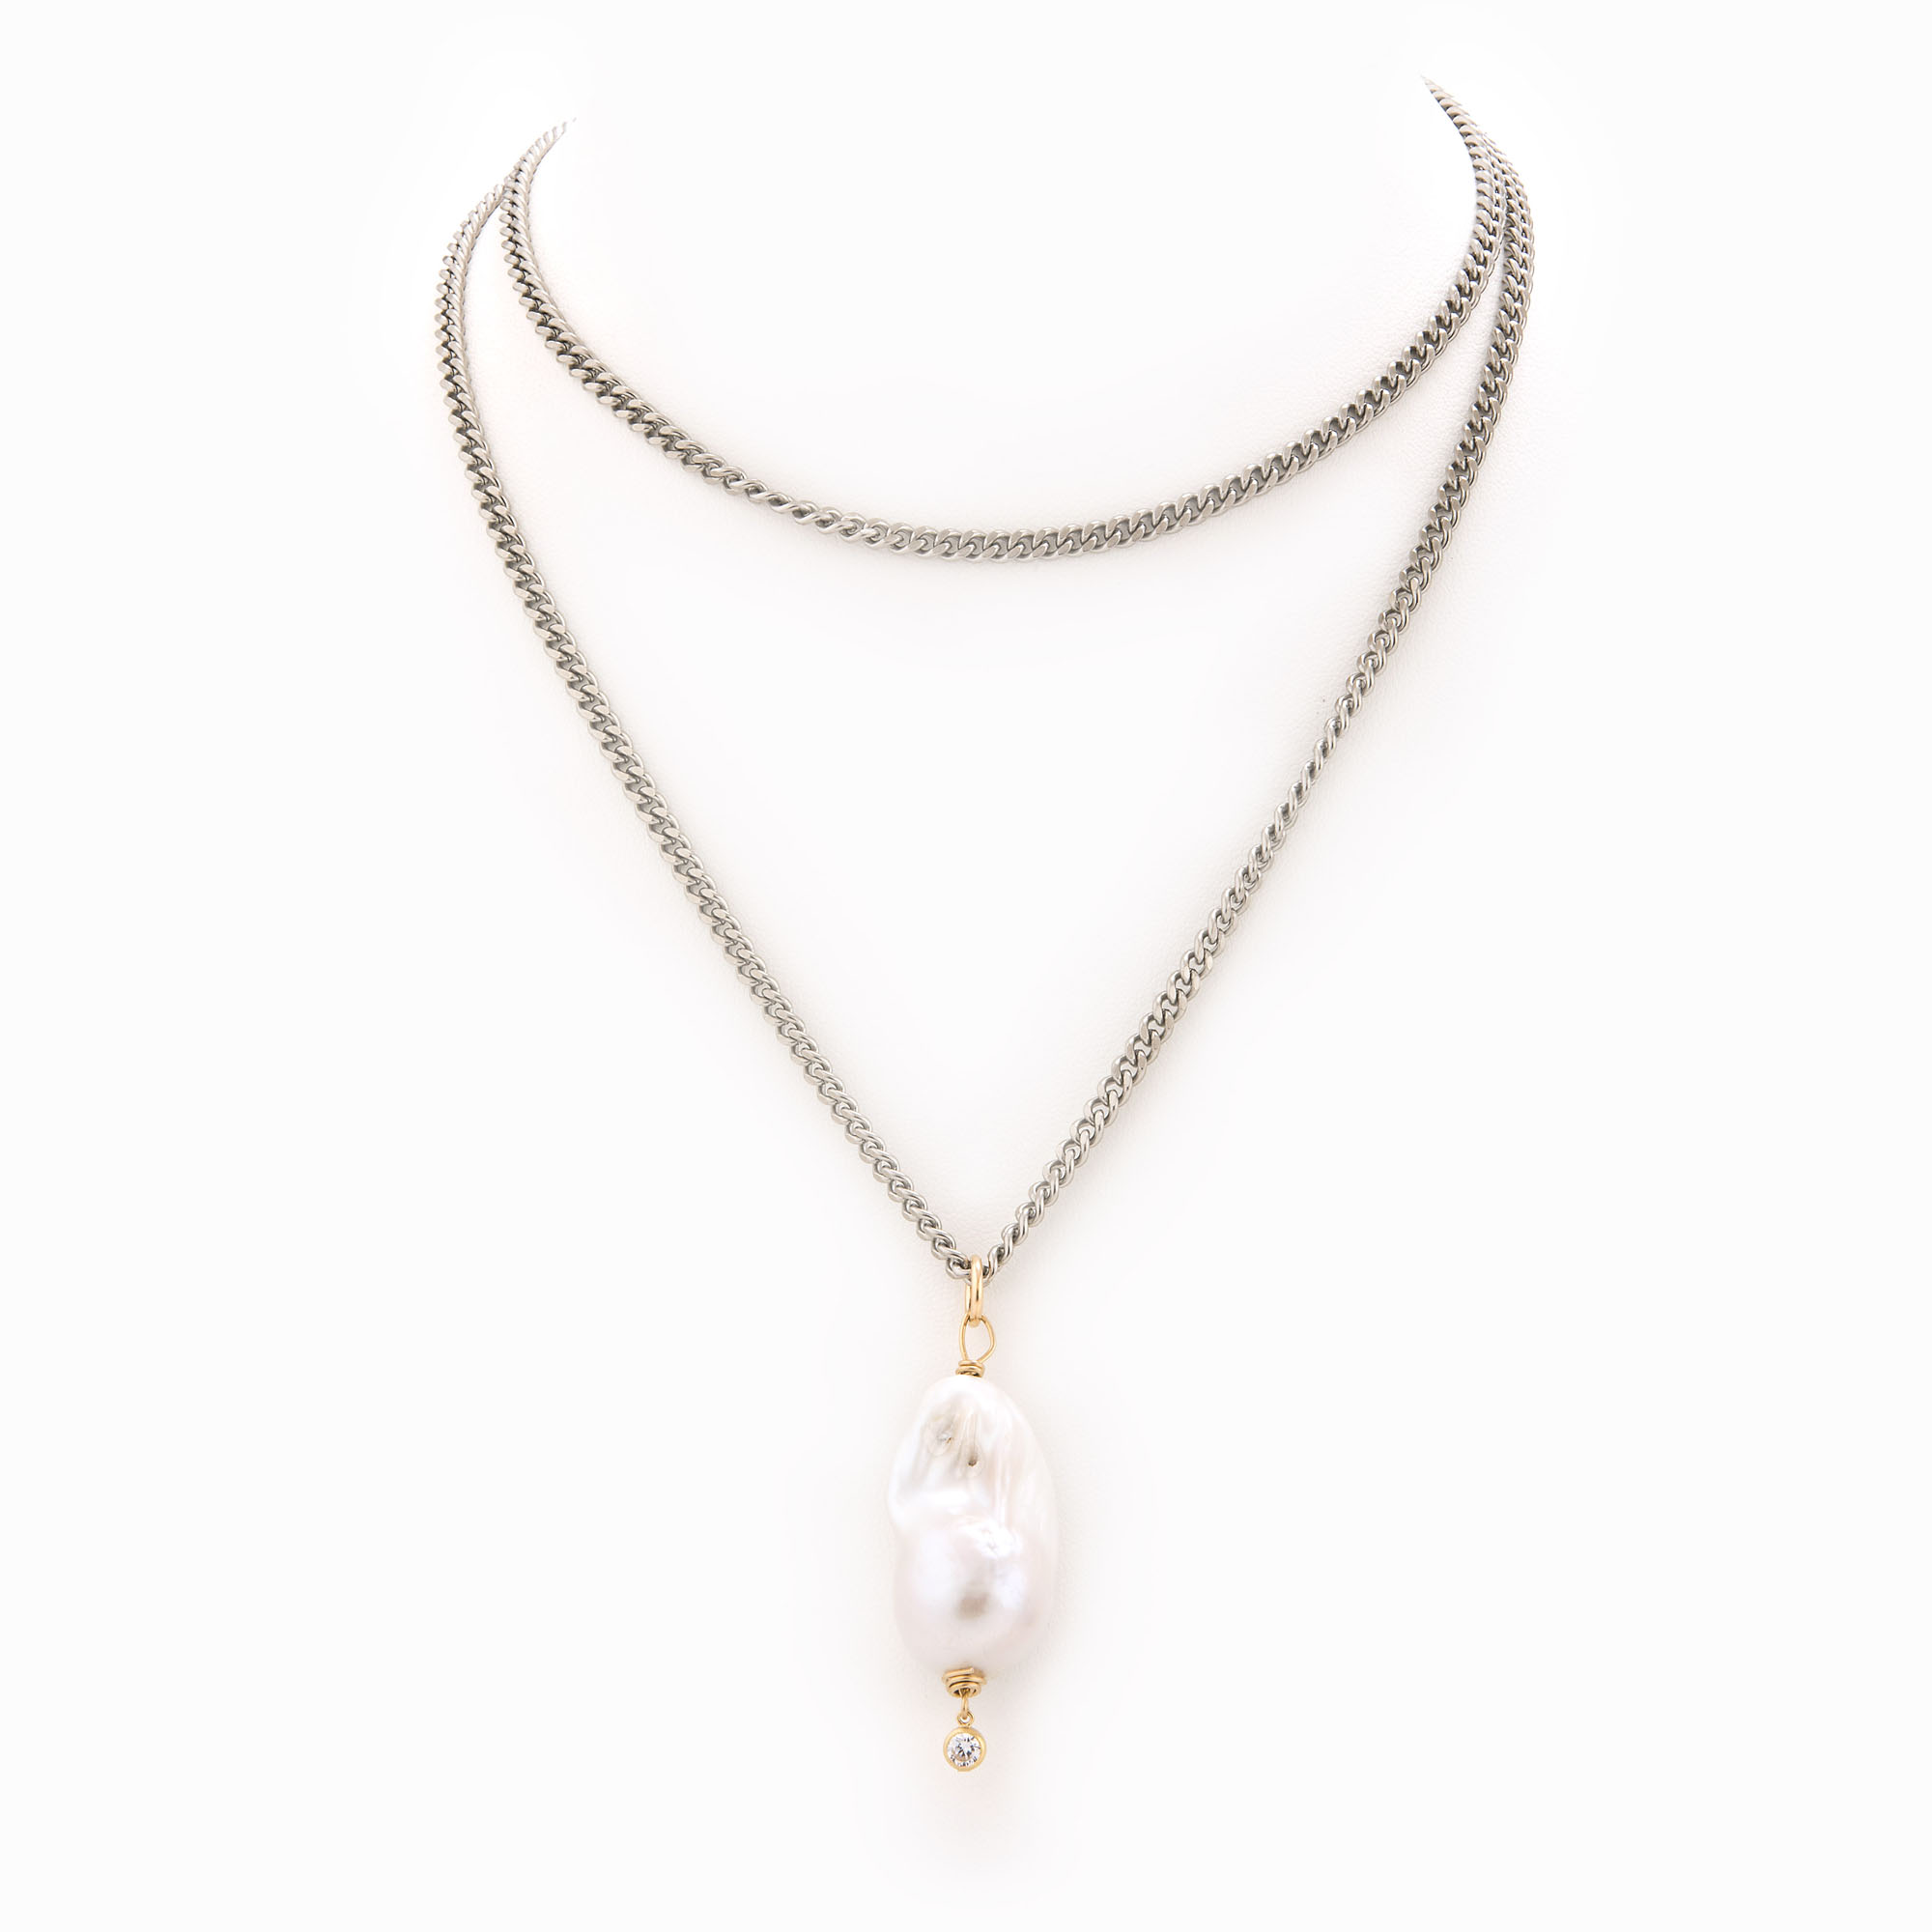 A flat oxidized sterling silver chain necklace with 14k gold-filled accents, baroque pearl and crystal bezel detail.